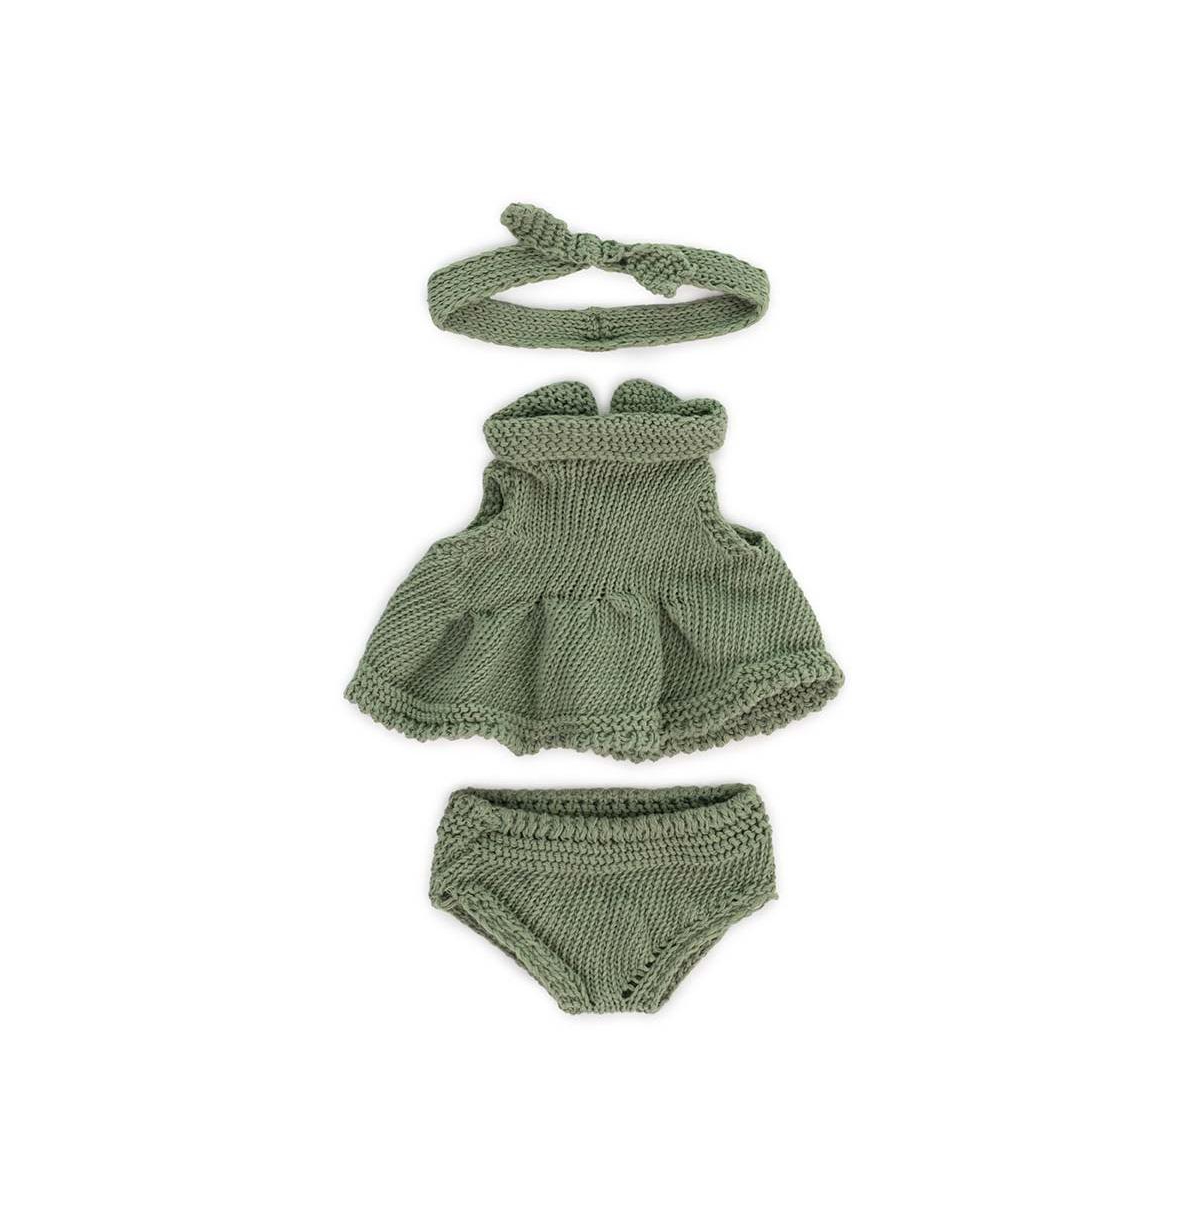 Miniland Kids' Knitted Doll Outfit 8.25" In Green